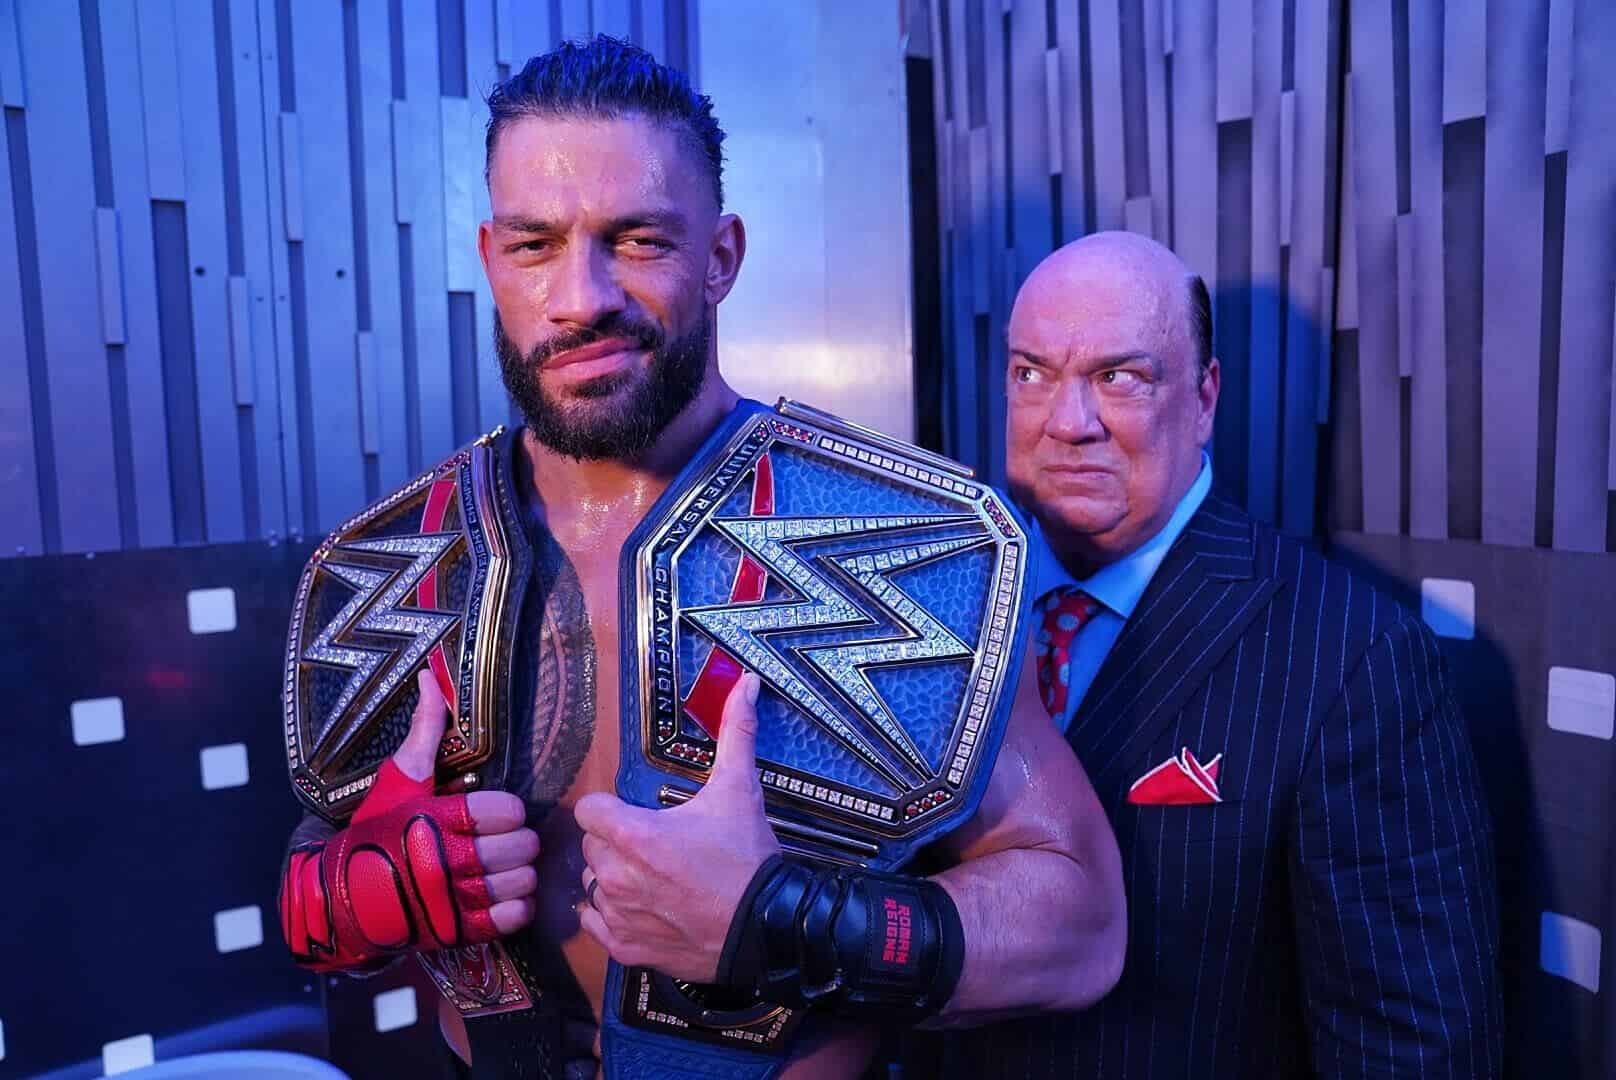 Roman Reigns is the Undisputed WWE Champion